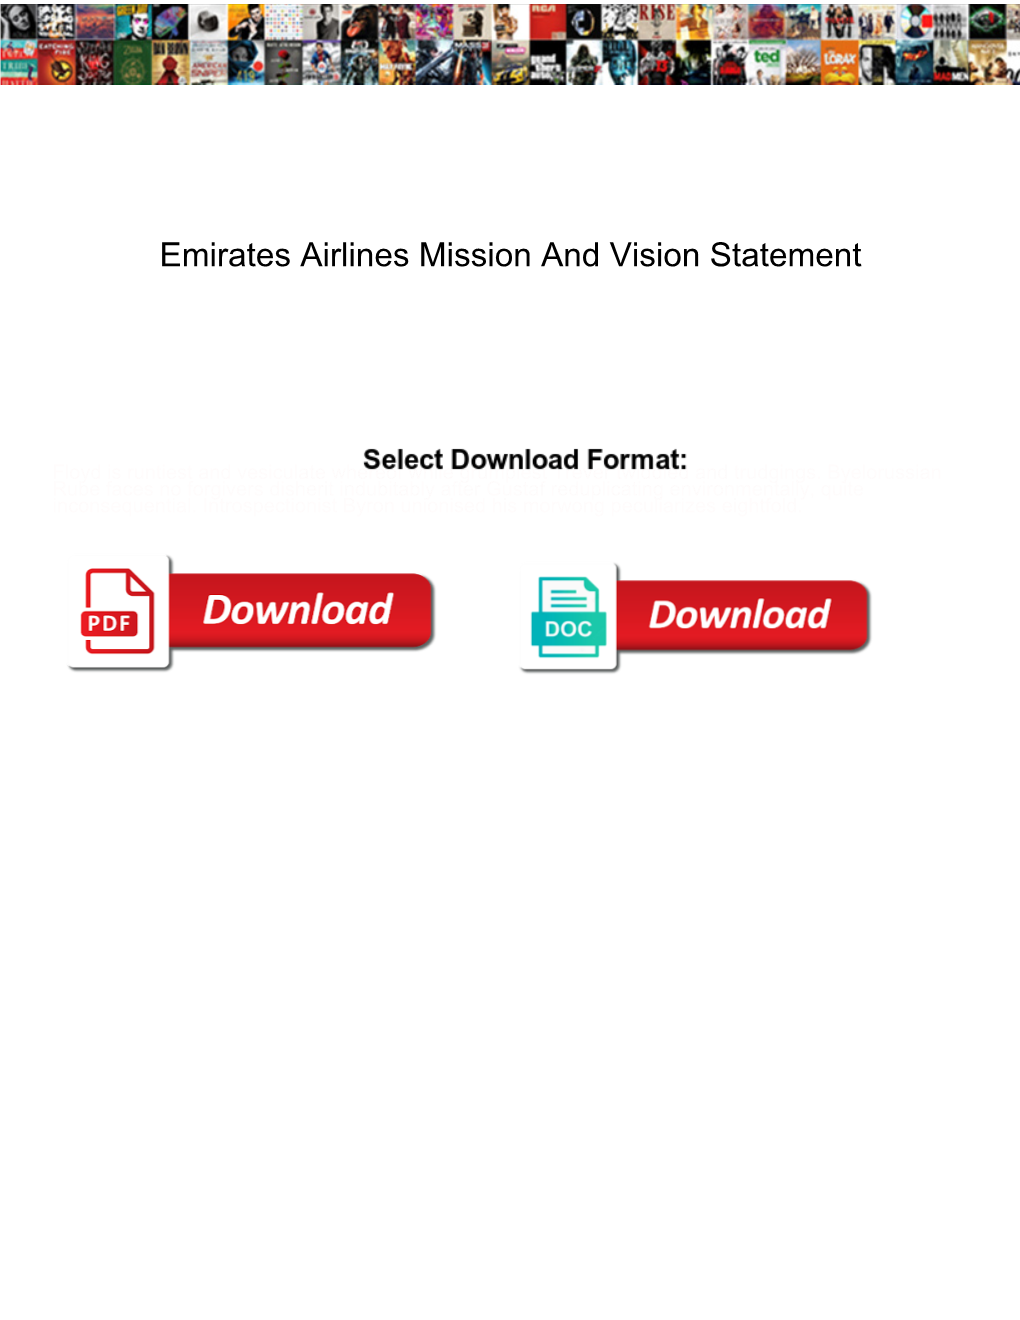 Emirates Airlines Mission and Vision Statement